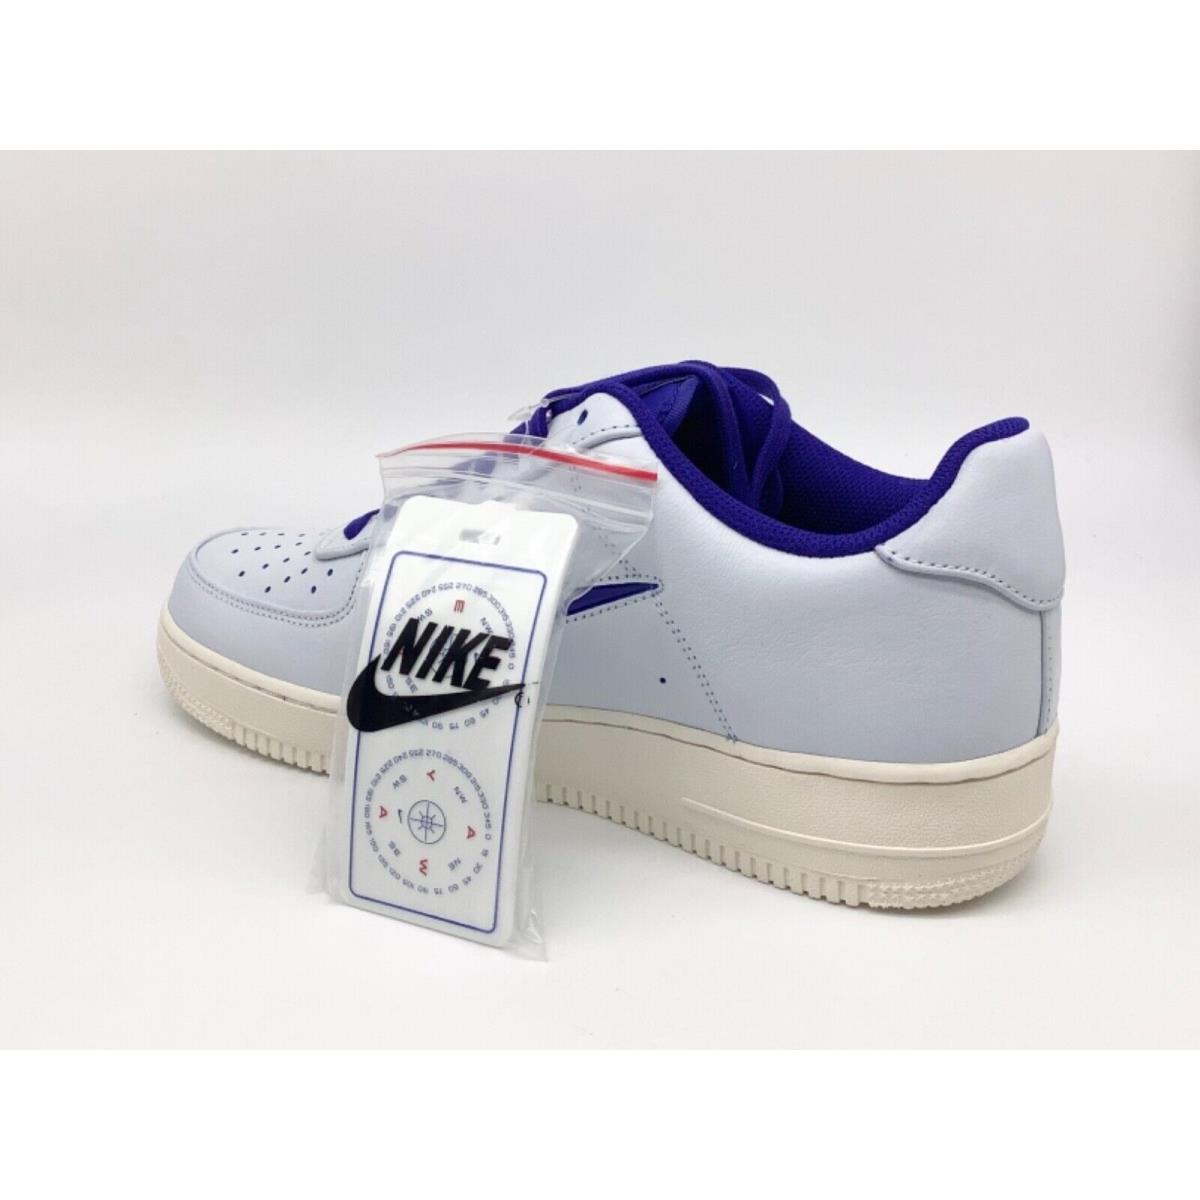 Nike shoes Air Force - Blue 1